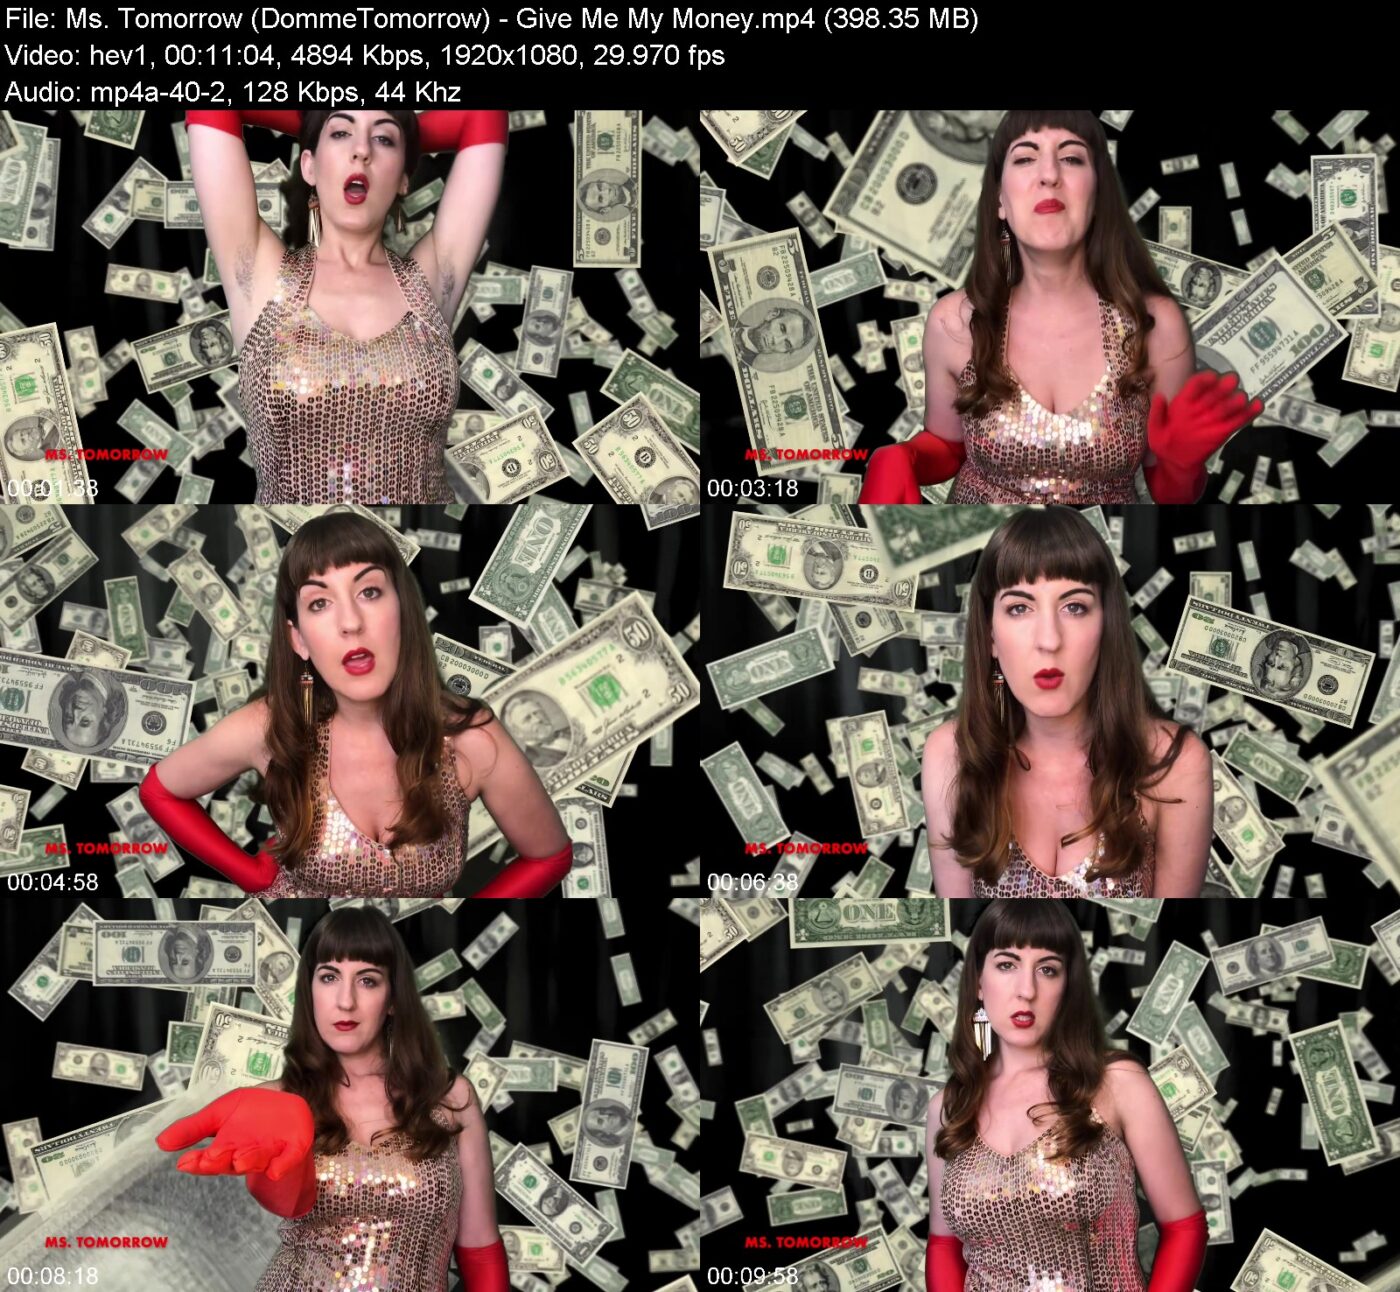 Actress: Ms. Tomorrow (DommeTomorrow). Title and Studio: Give Me My Money